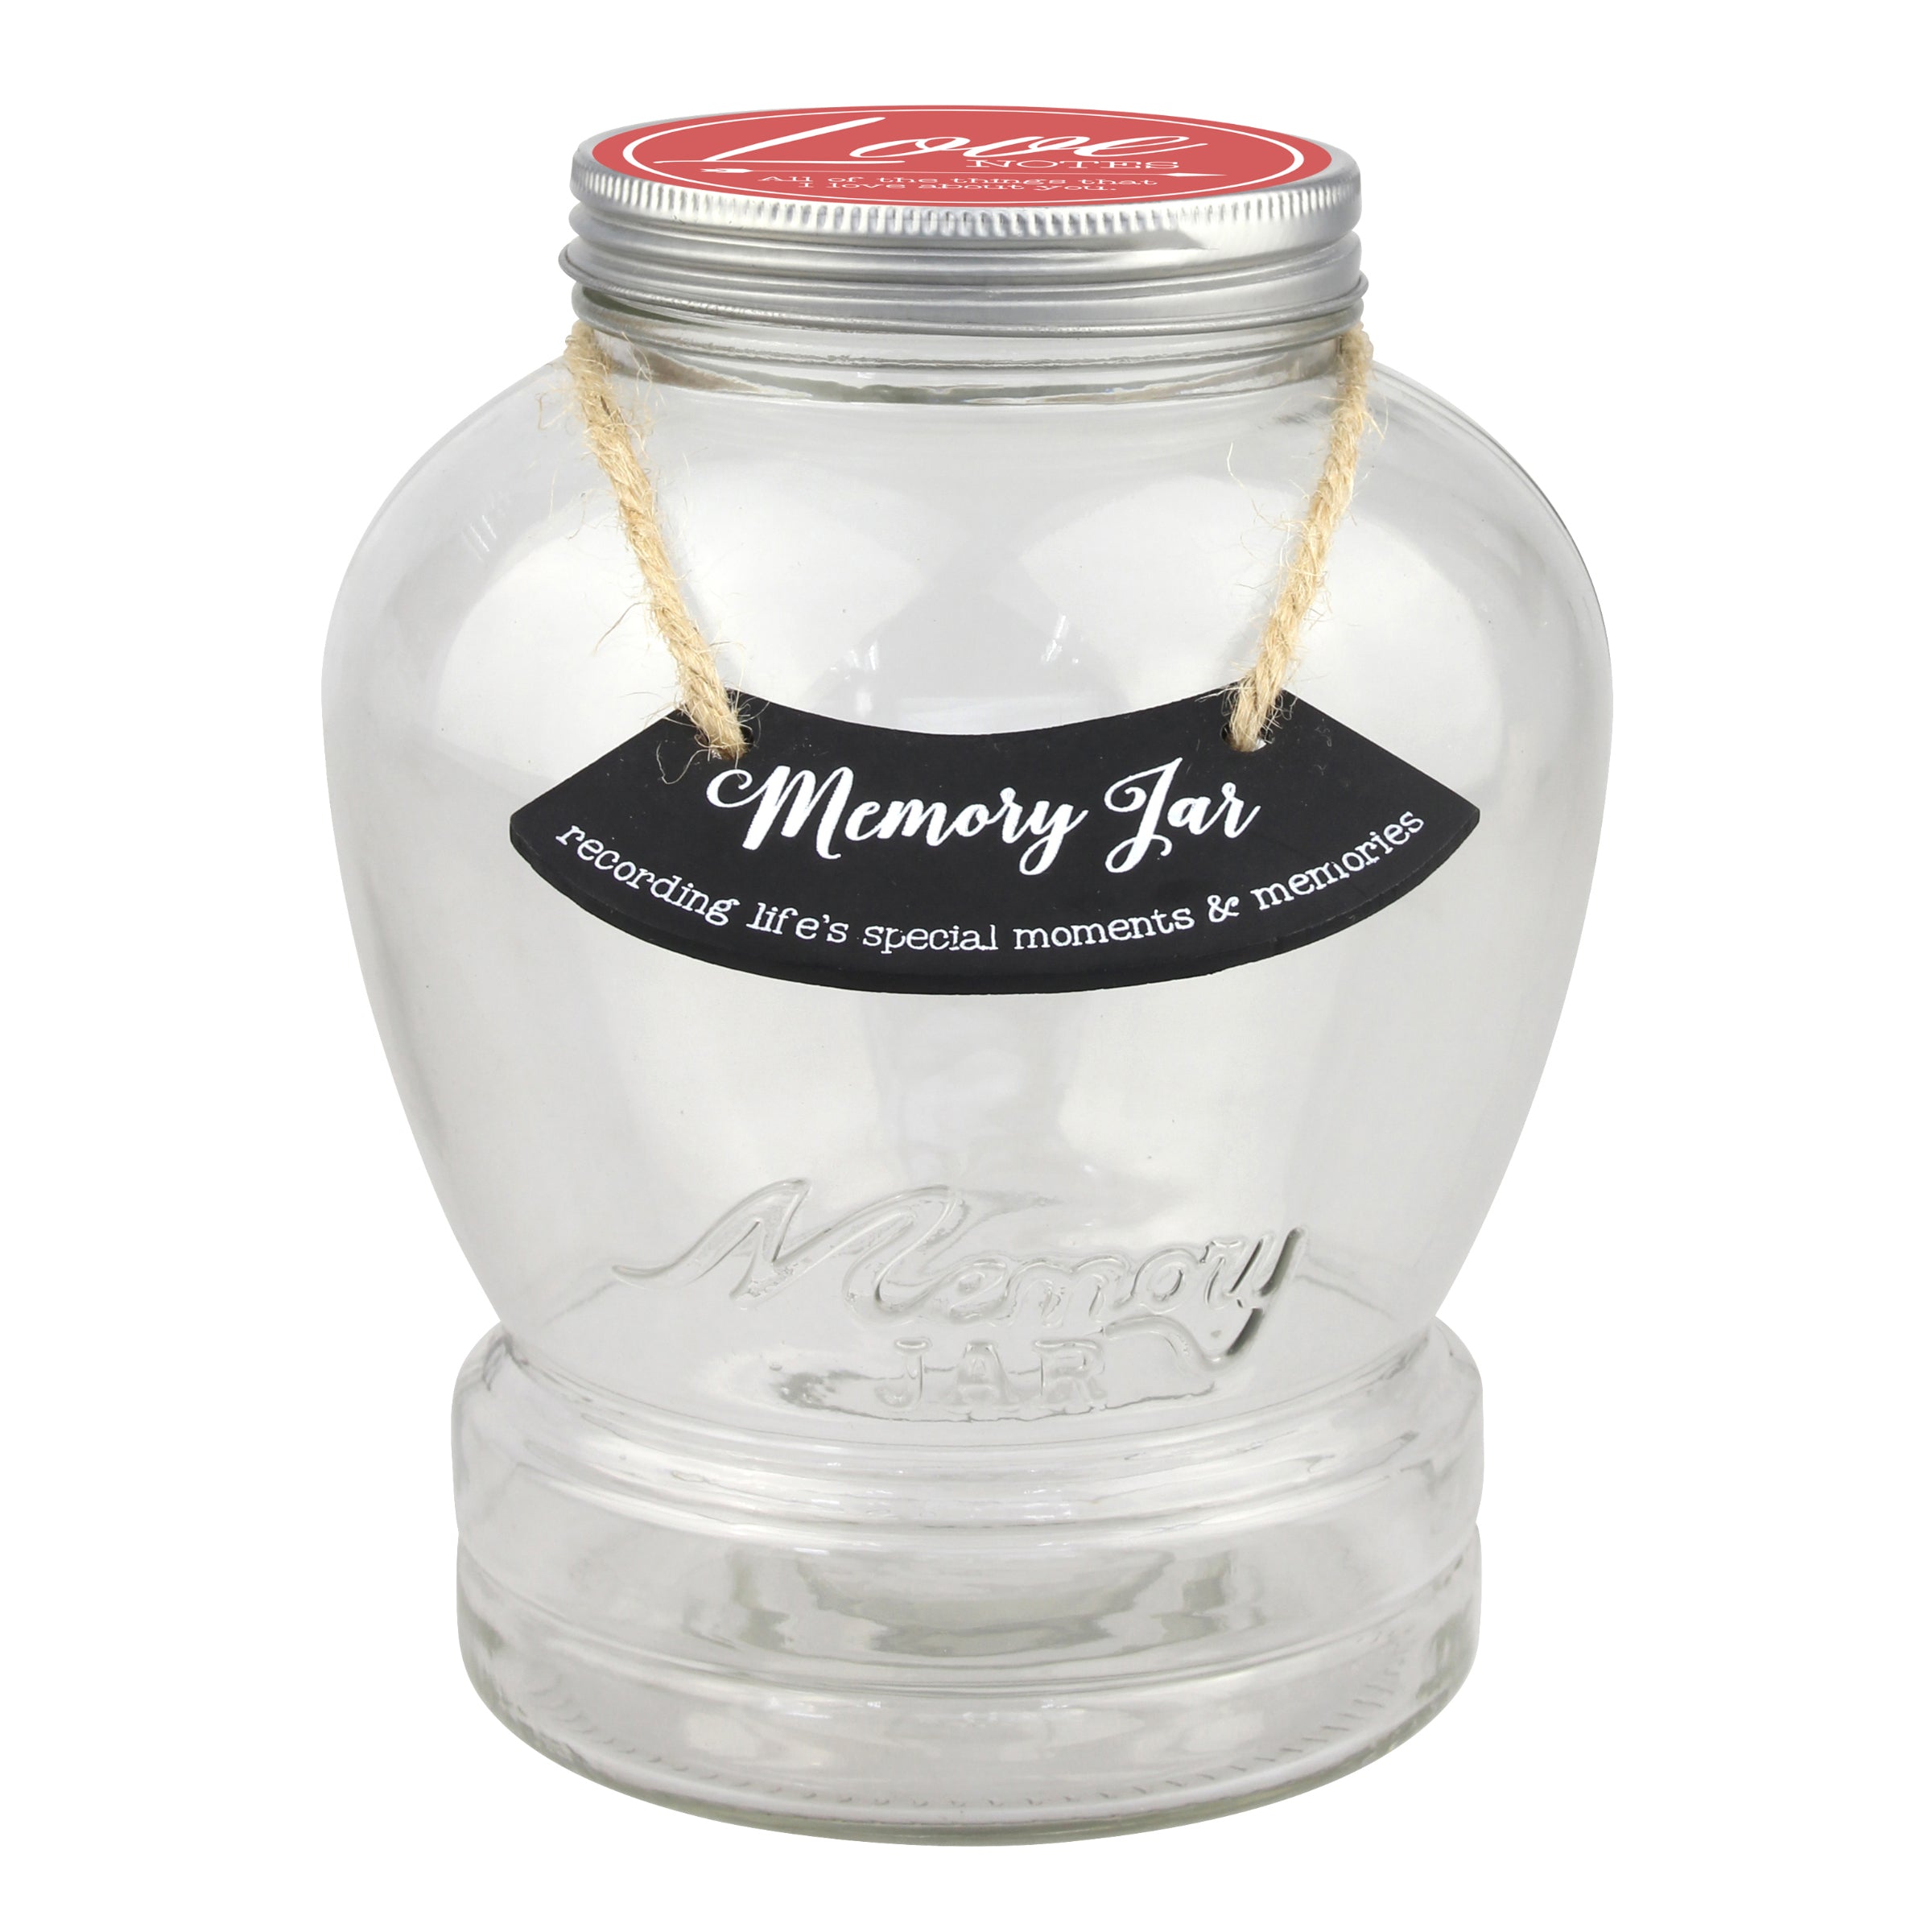 Top Shelf Love Notes Memory Jar Kit with 180 Tickets, Pen, and Decorative Lid (WS)